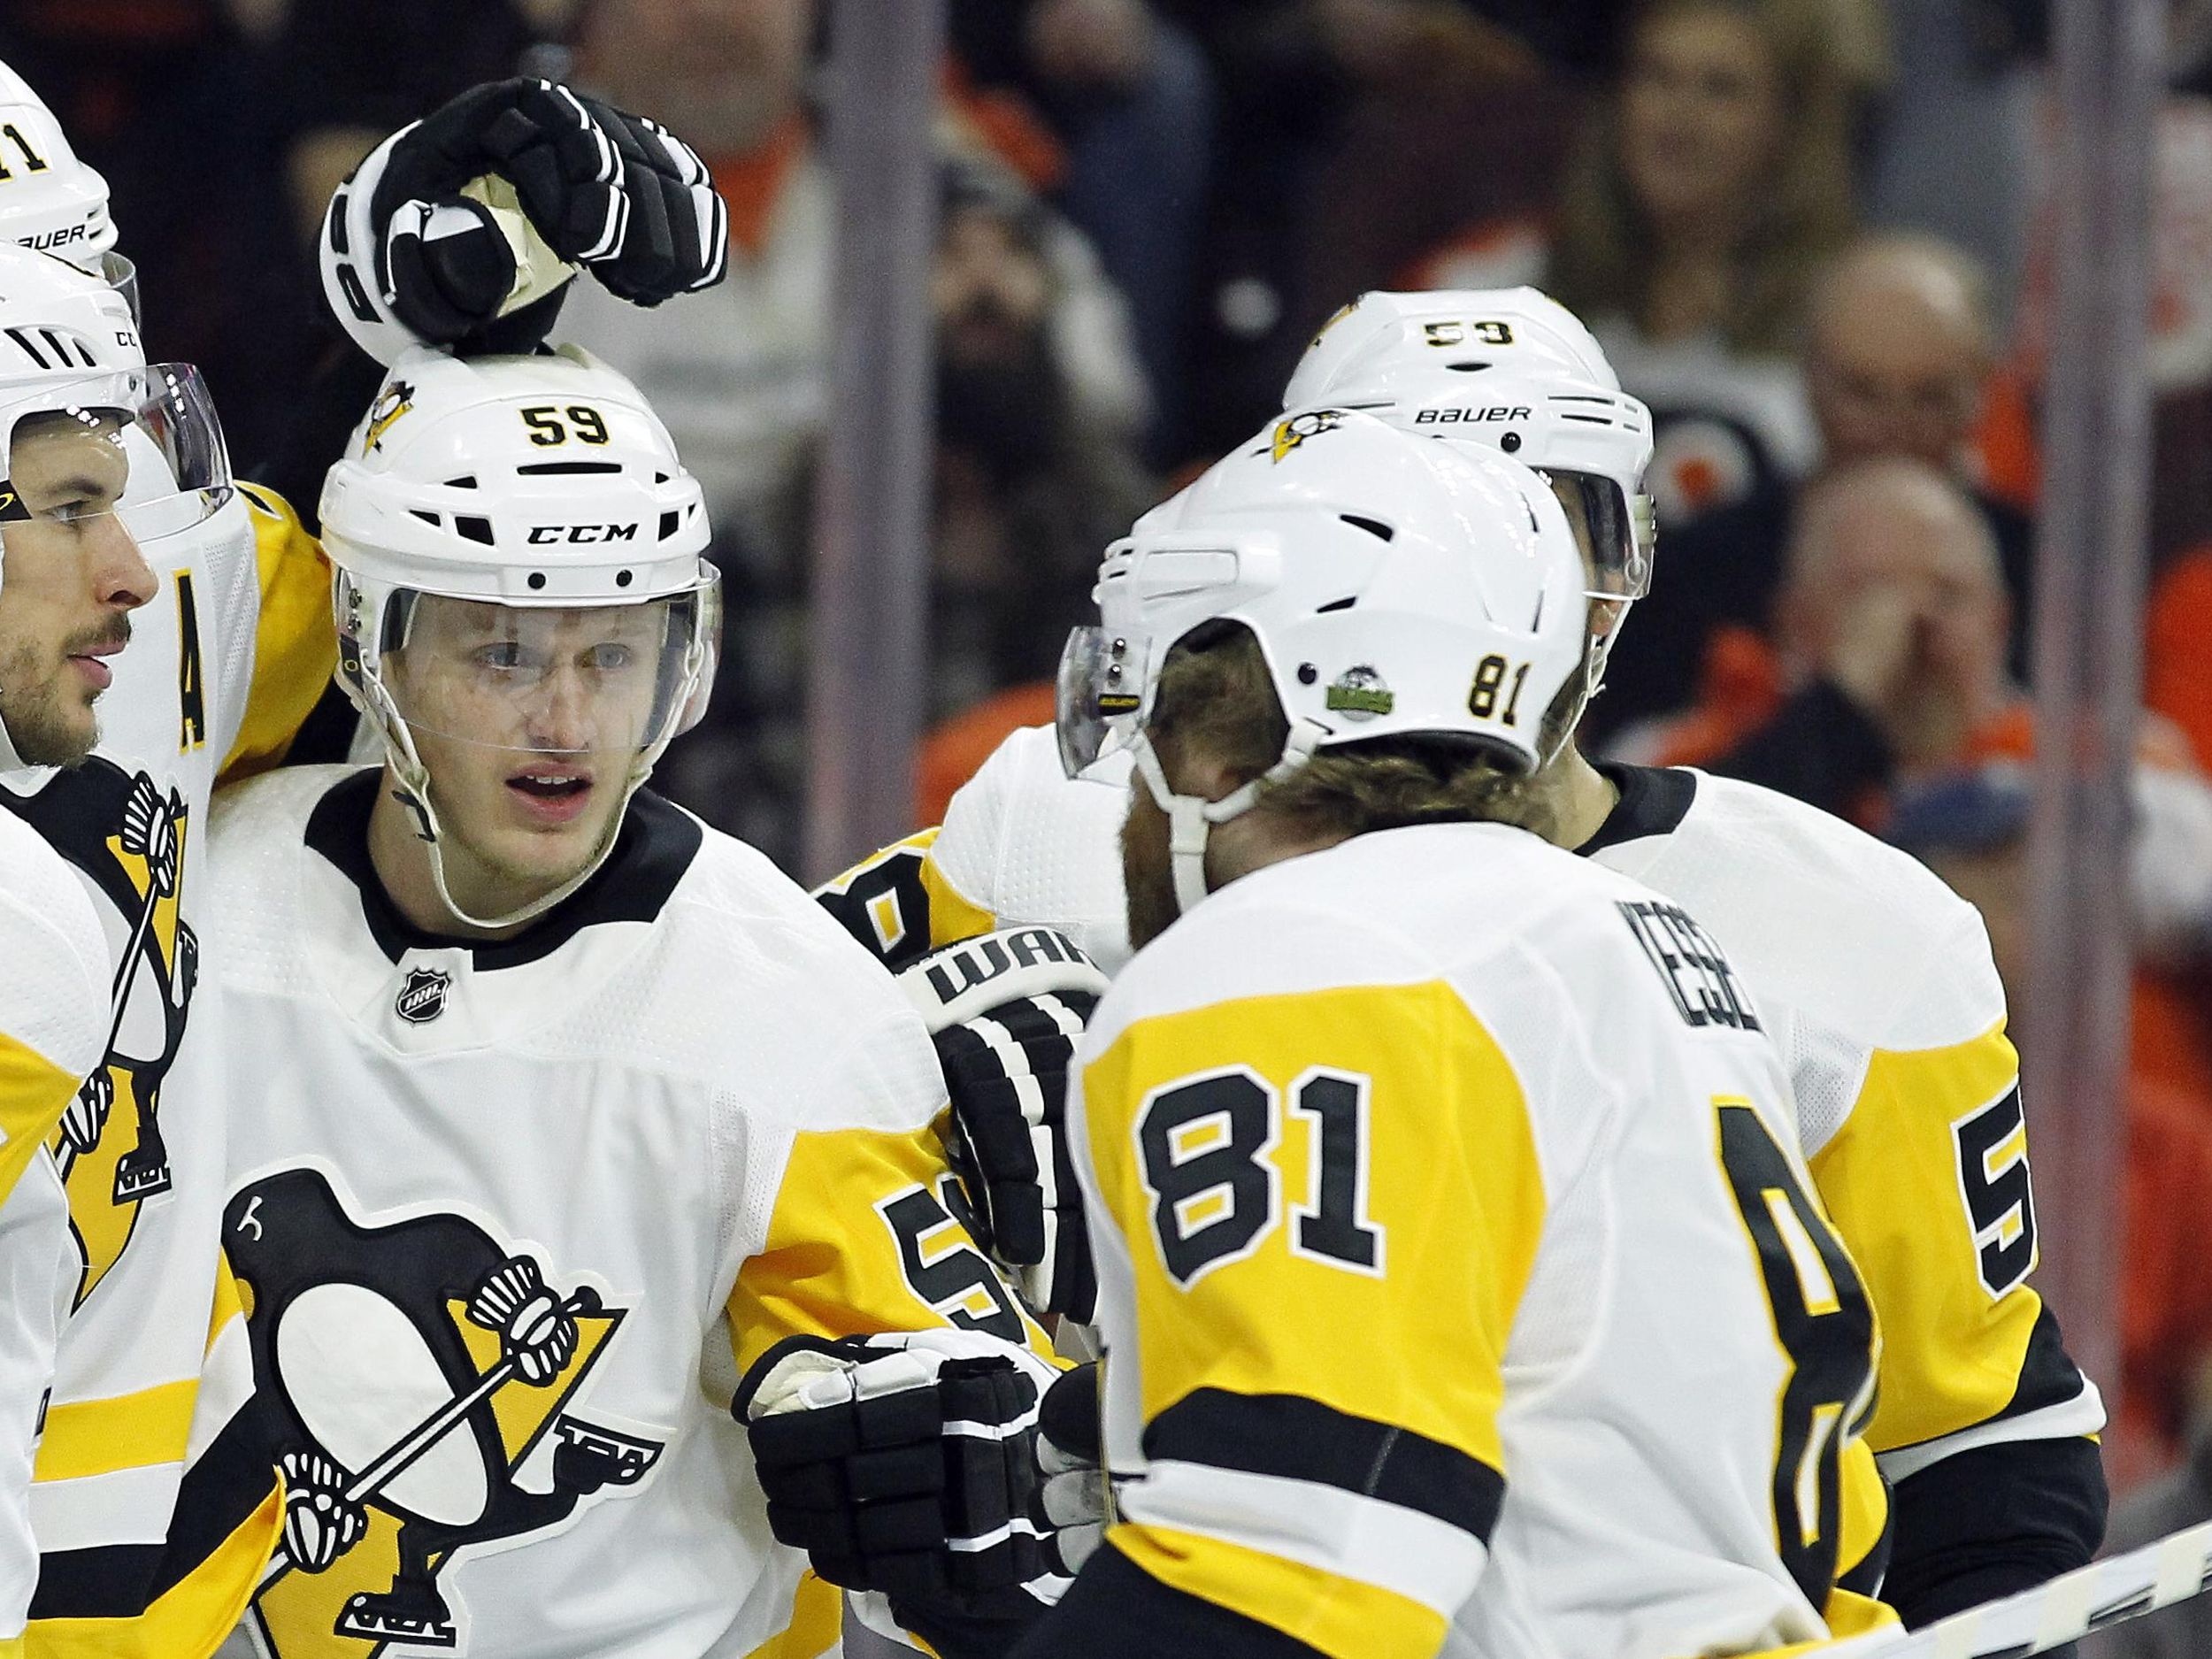 Crosby scores again against Flyers to lead the Penguins